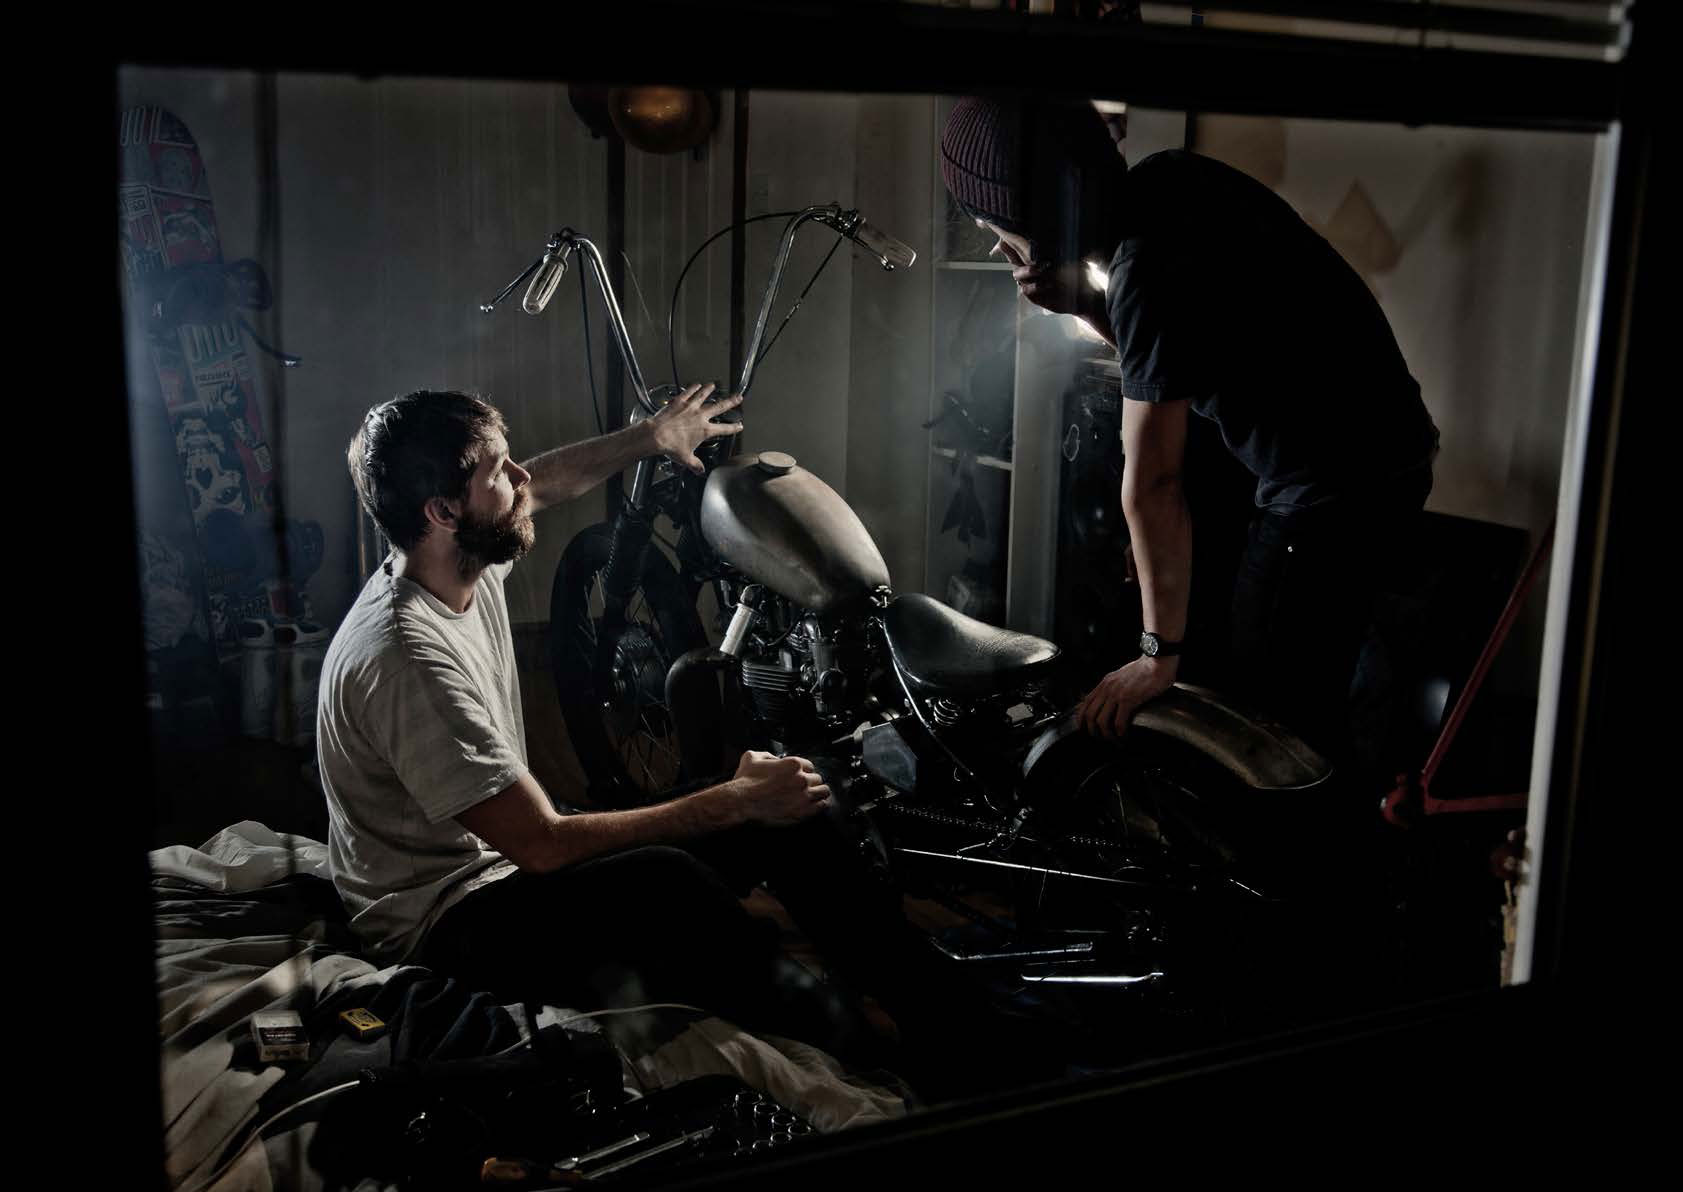 Two young men discussing a motorcycle chopper parked in their bedroom.